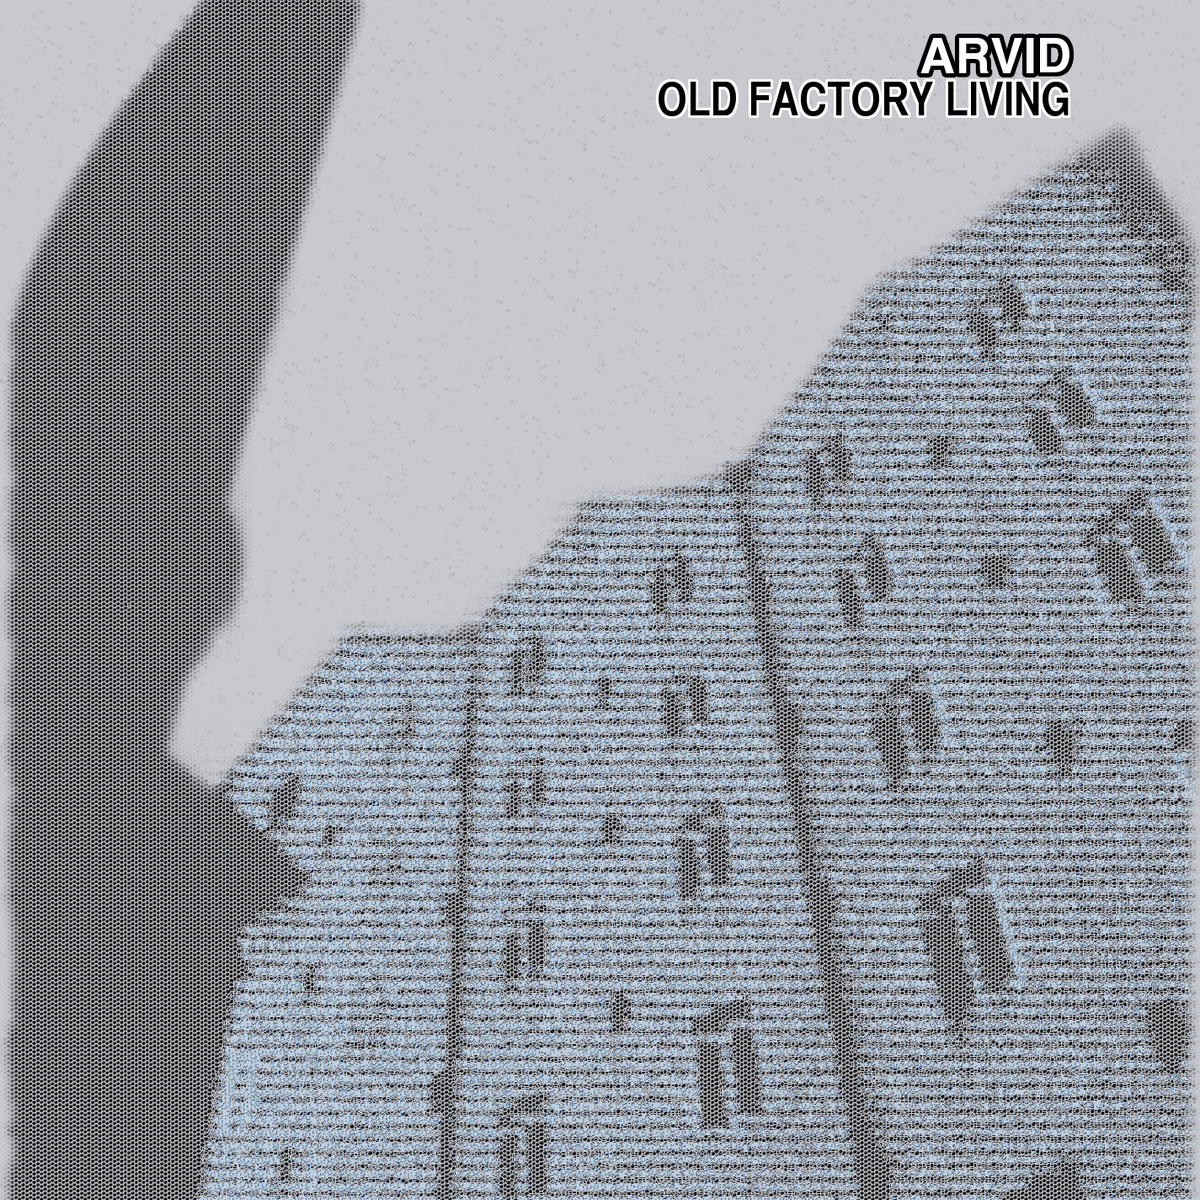 Arvid Releases Old Factory Living